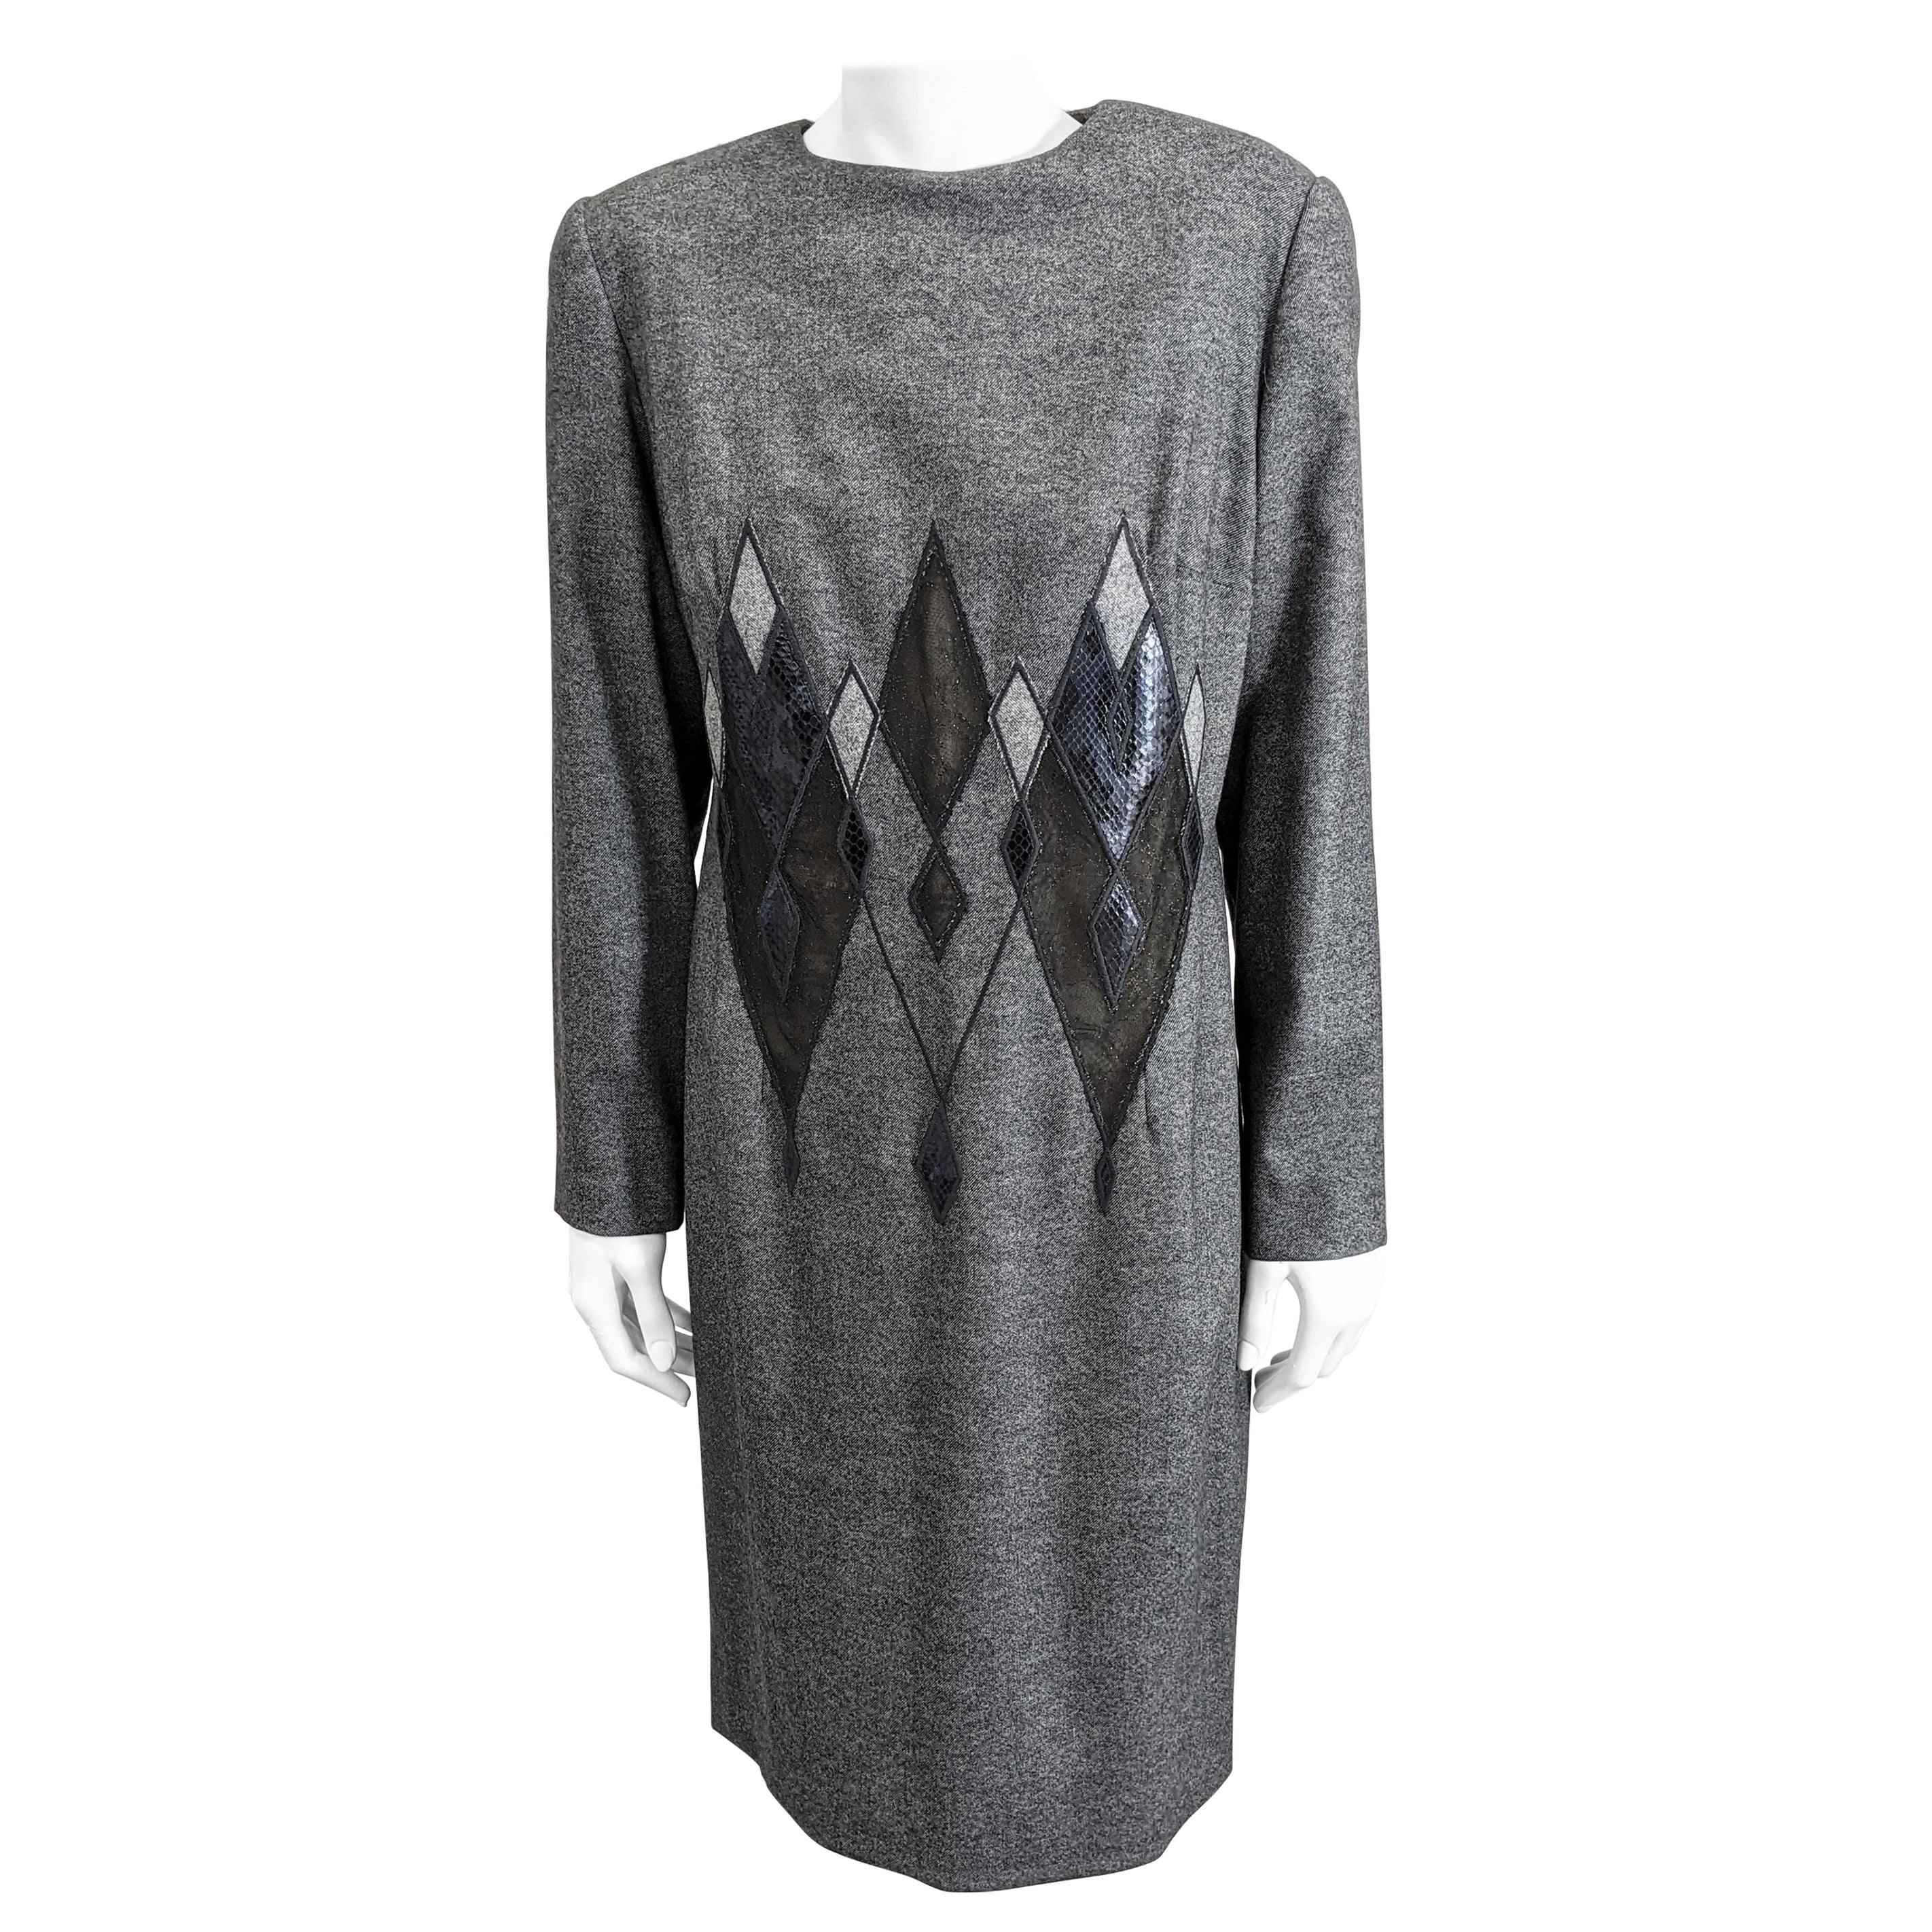 Givenchy By Alexander McQueen Flannel, Metallic Lace and Snakeskin Dress For Sale